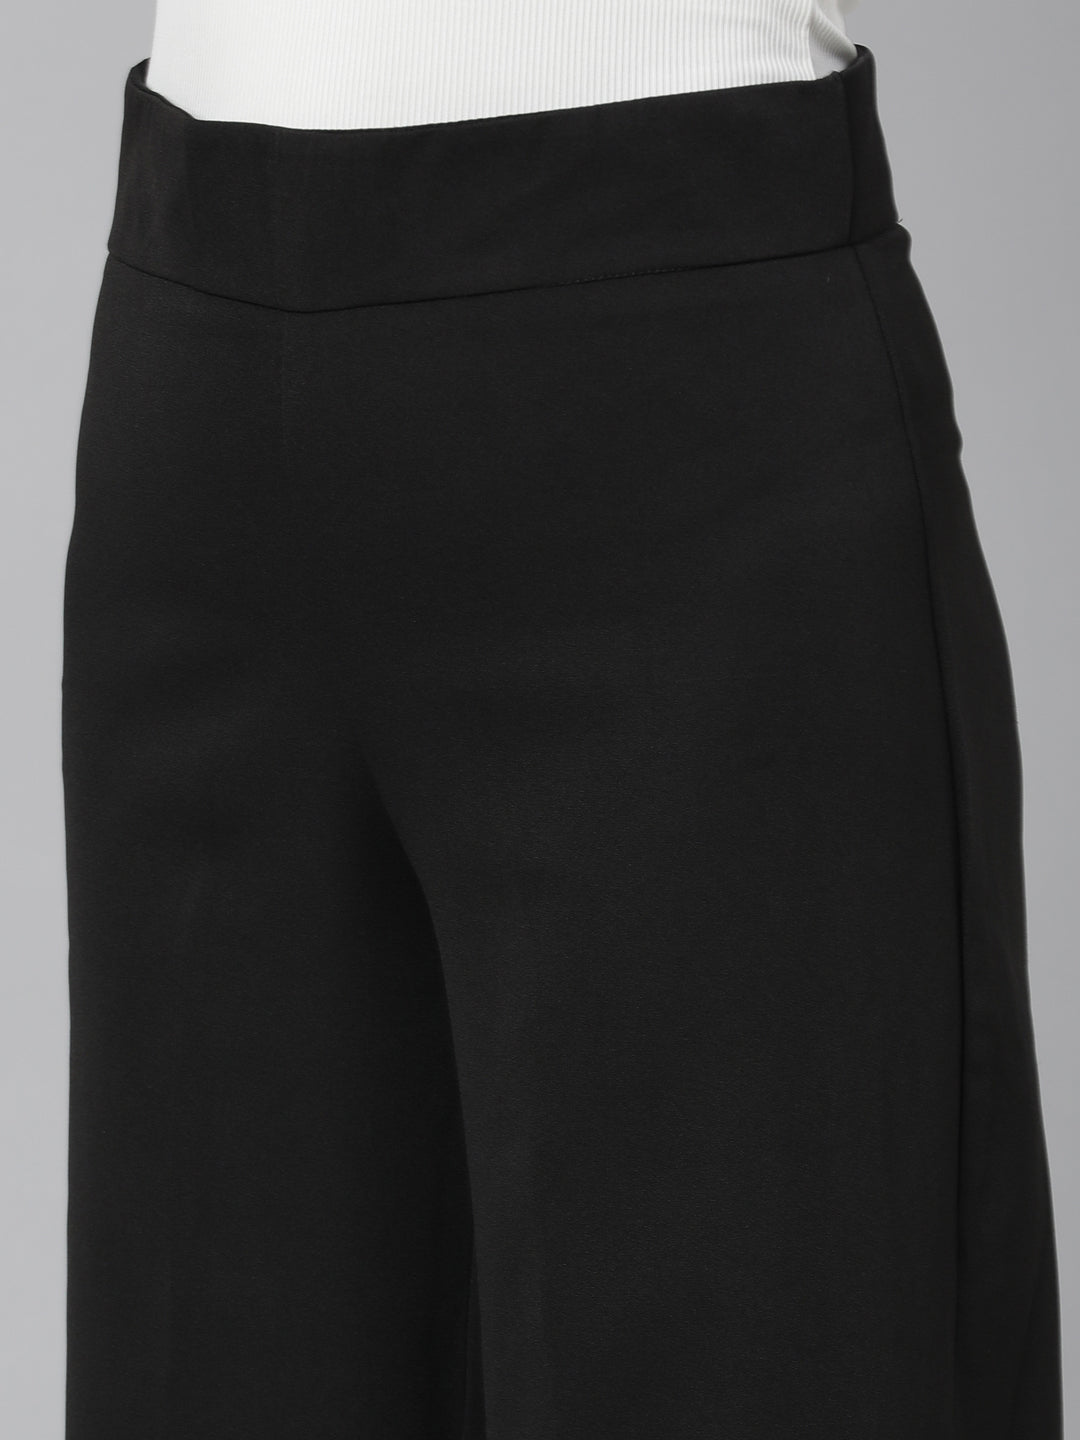 Women Black Solid Parallel Trousers